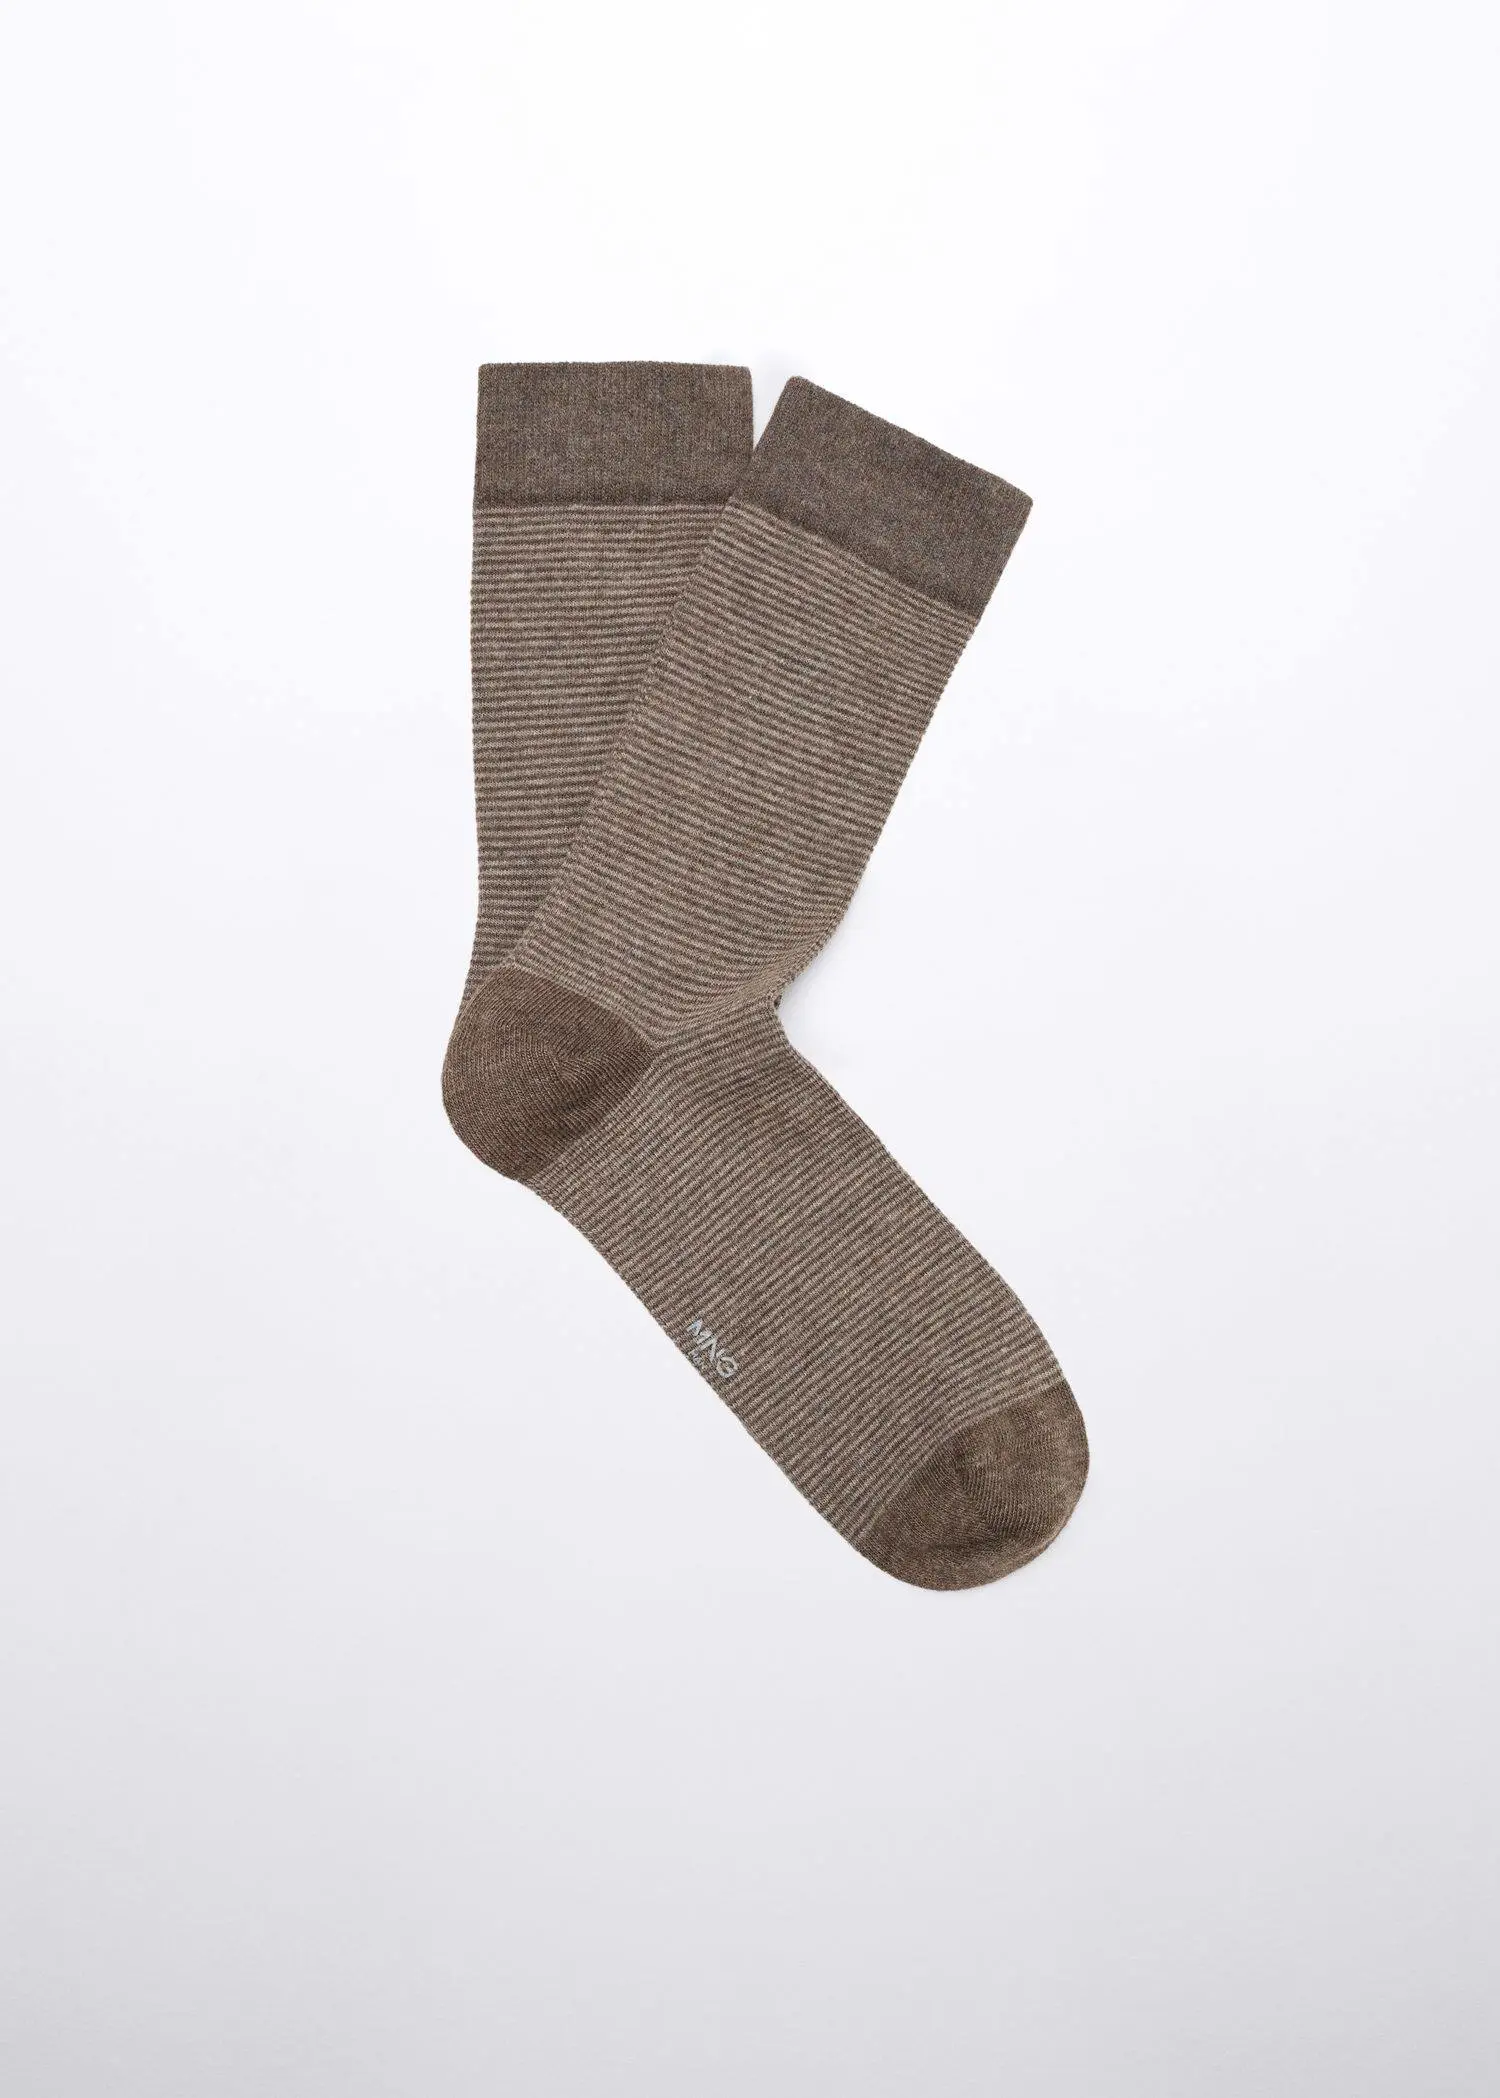 Mango Striped cotton socks. a pair of brown socks on top of a white surface. 